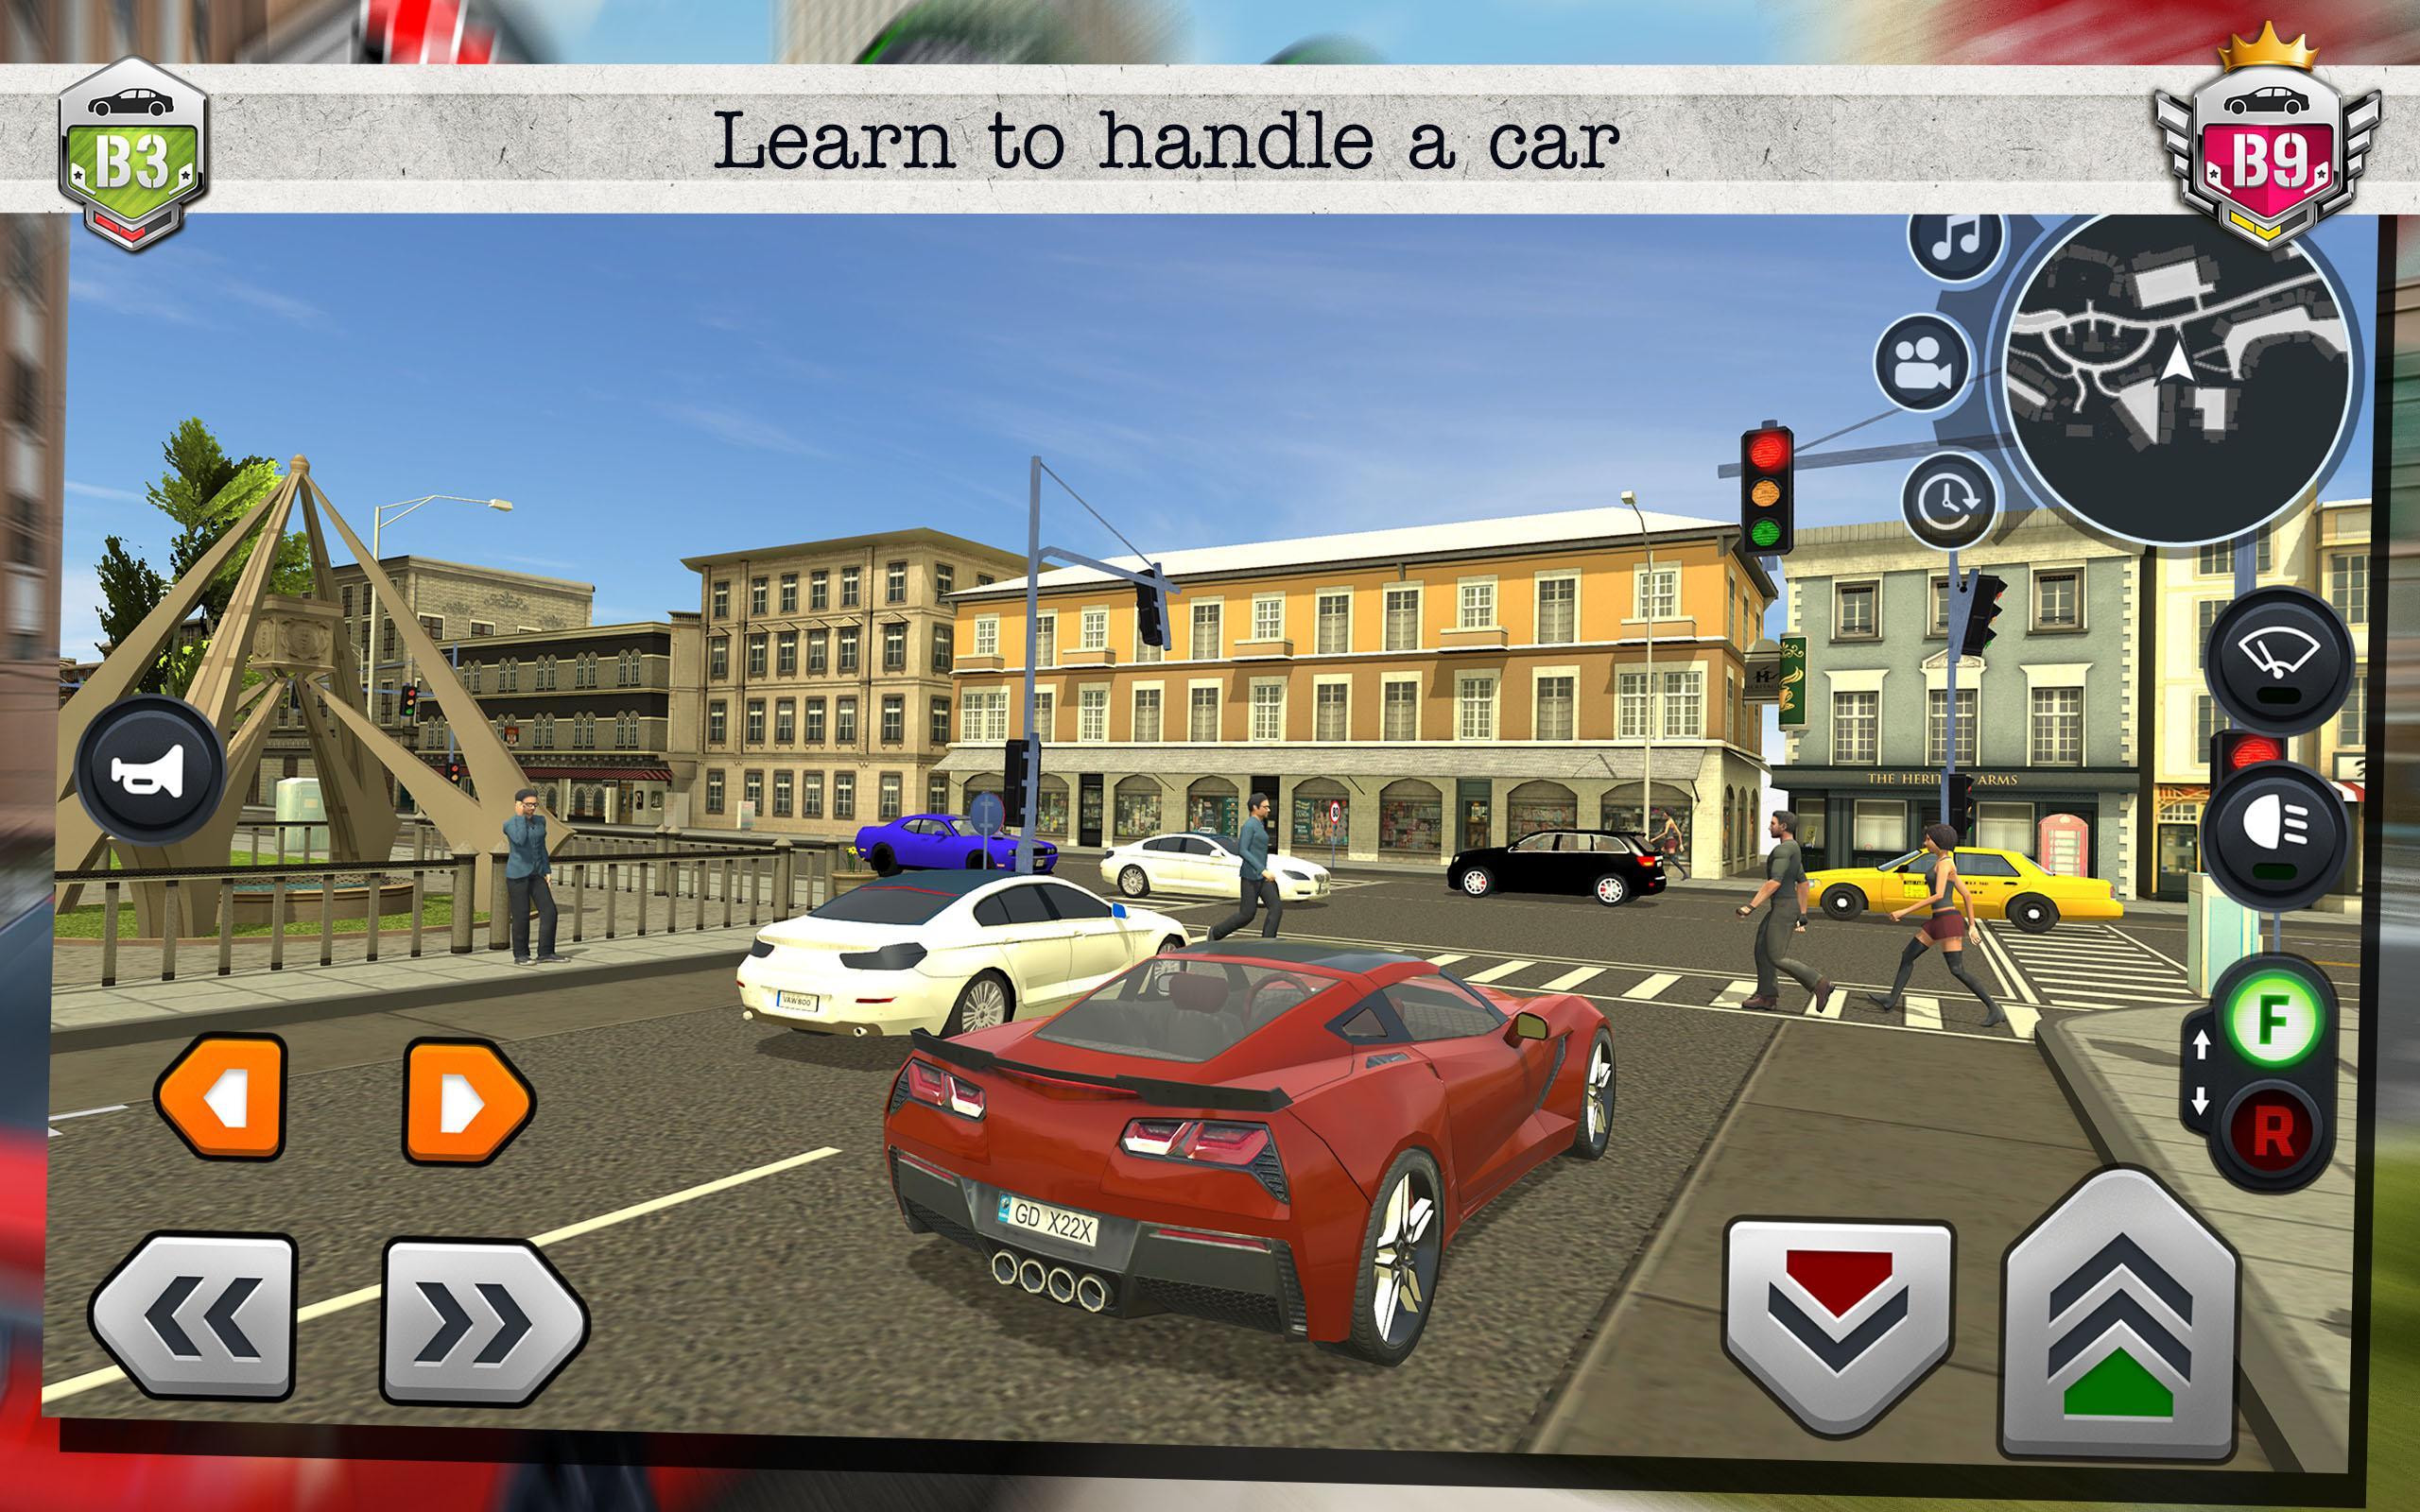 Driver’s License Course screenshot game